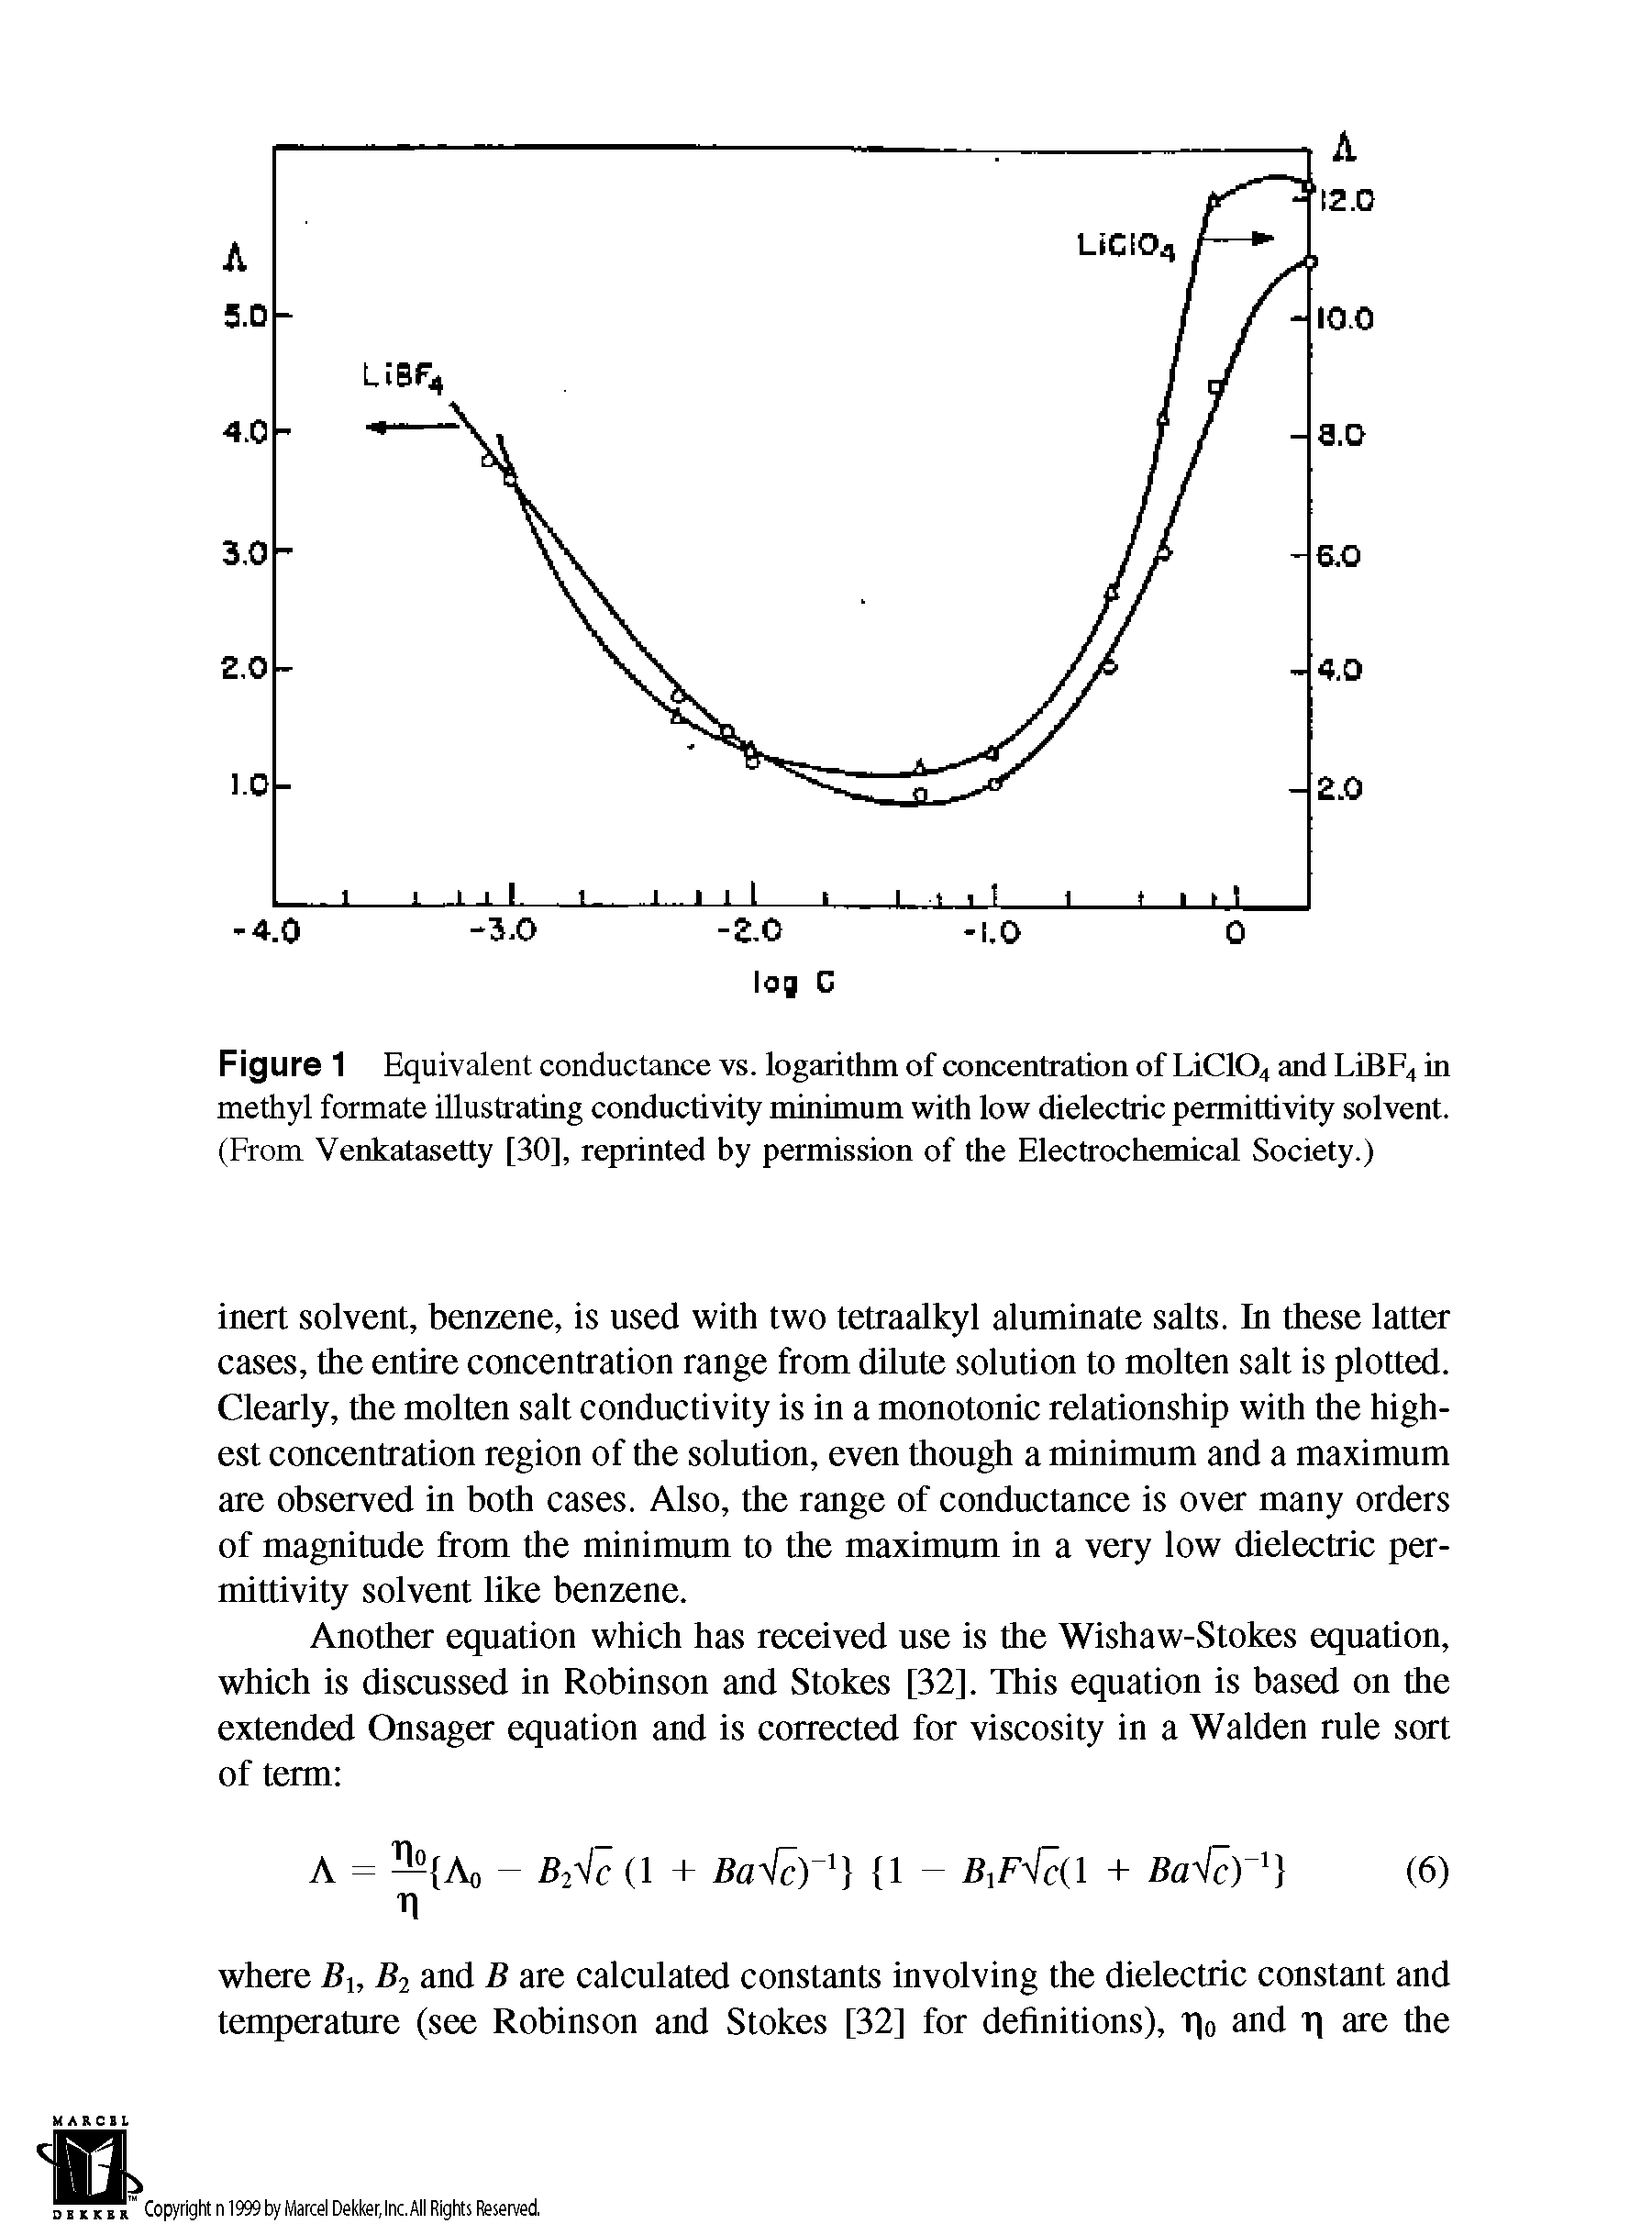 Figure 1 Equivalent conductance vs. logarithm of concentration of LiC104 and LiBF4 in methyl formate illustrating conductivity minimum with low dielectric permittivity solvent. (From Venkatasetty [30], reprinted by permission of the Electrochemical Society.)...